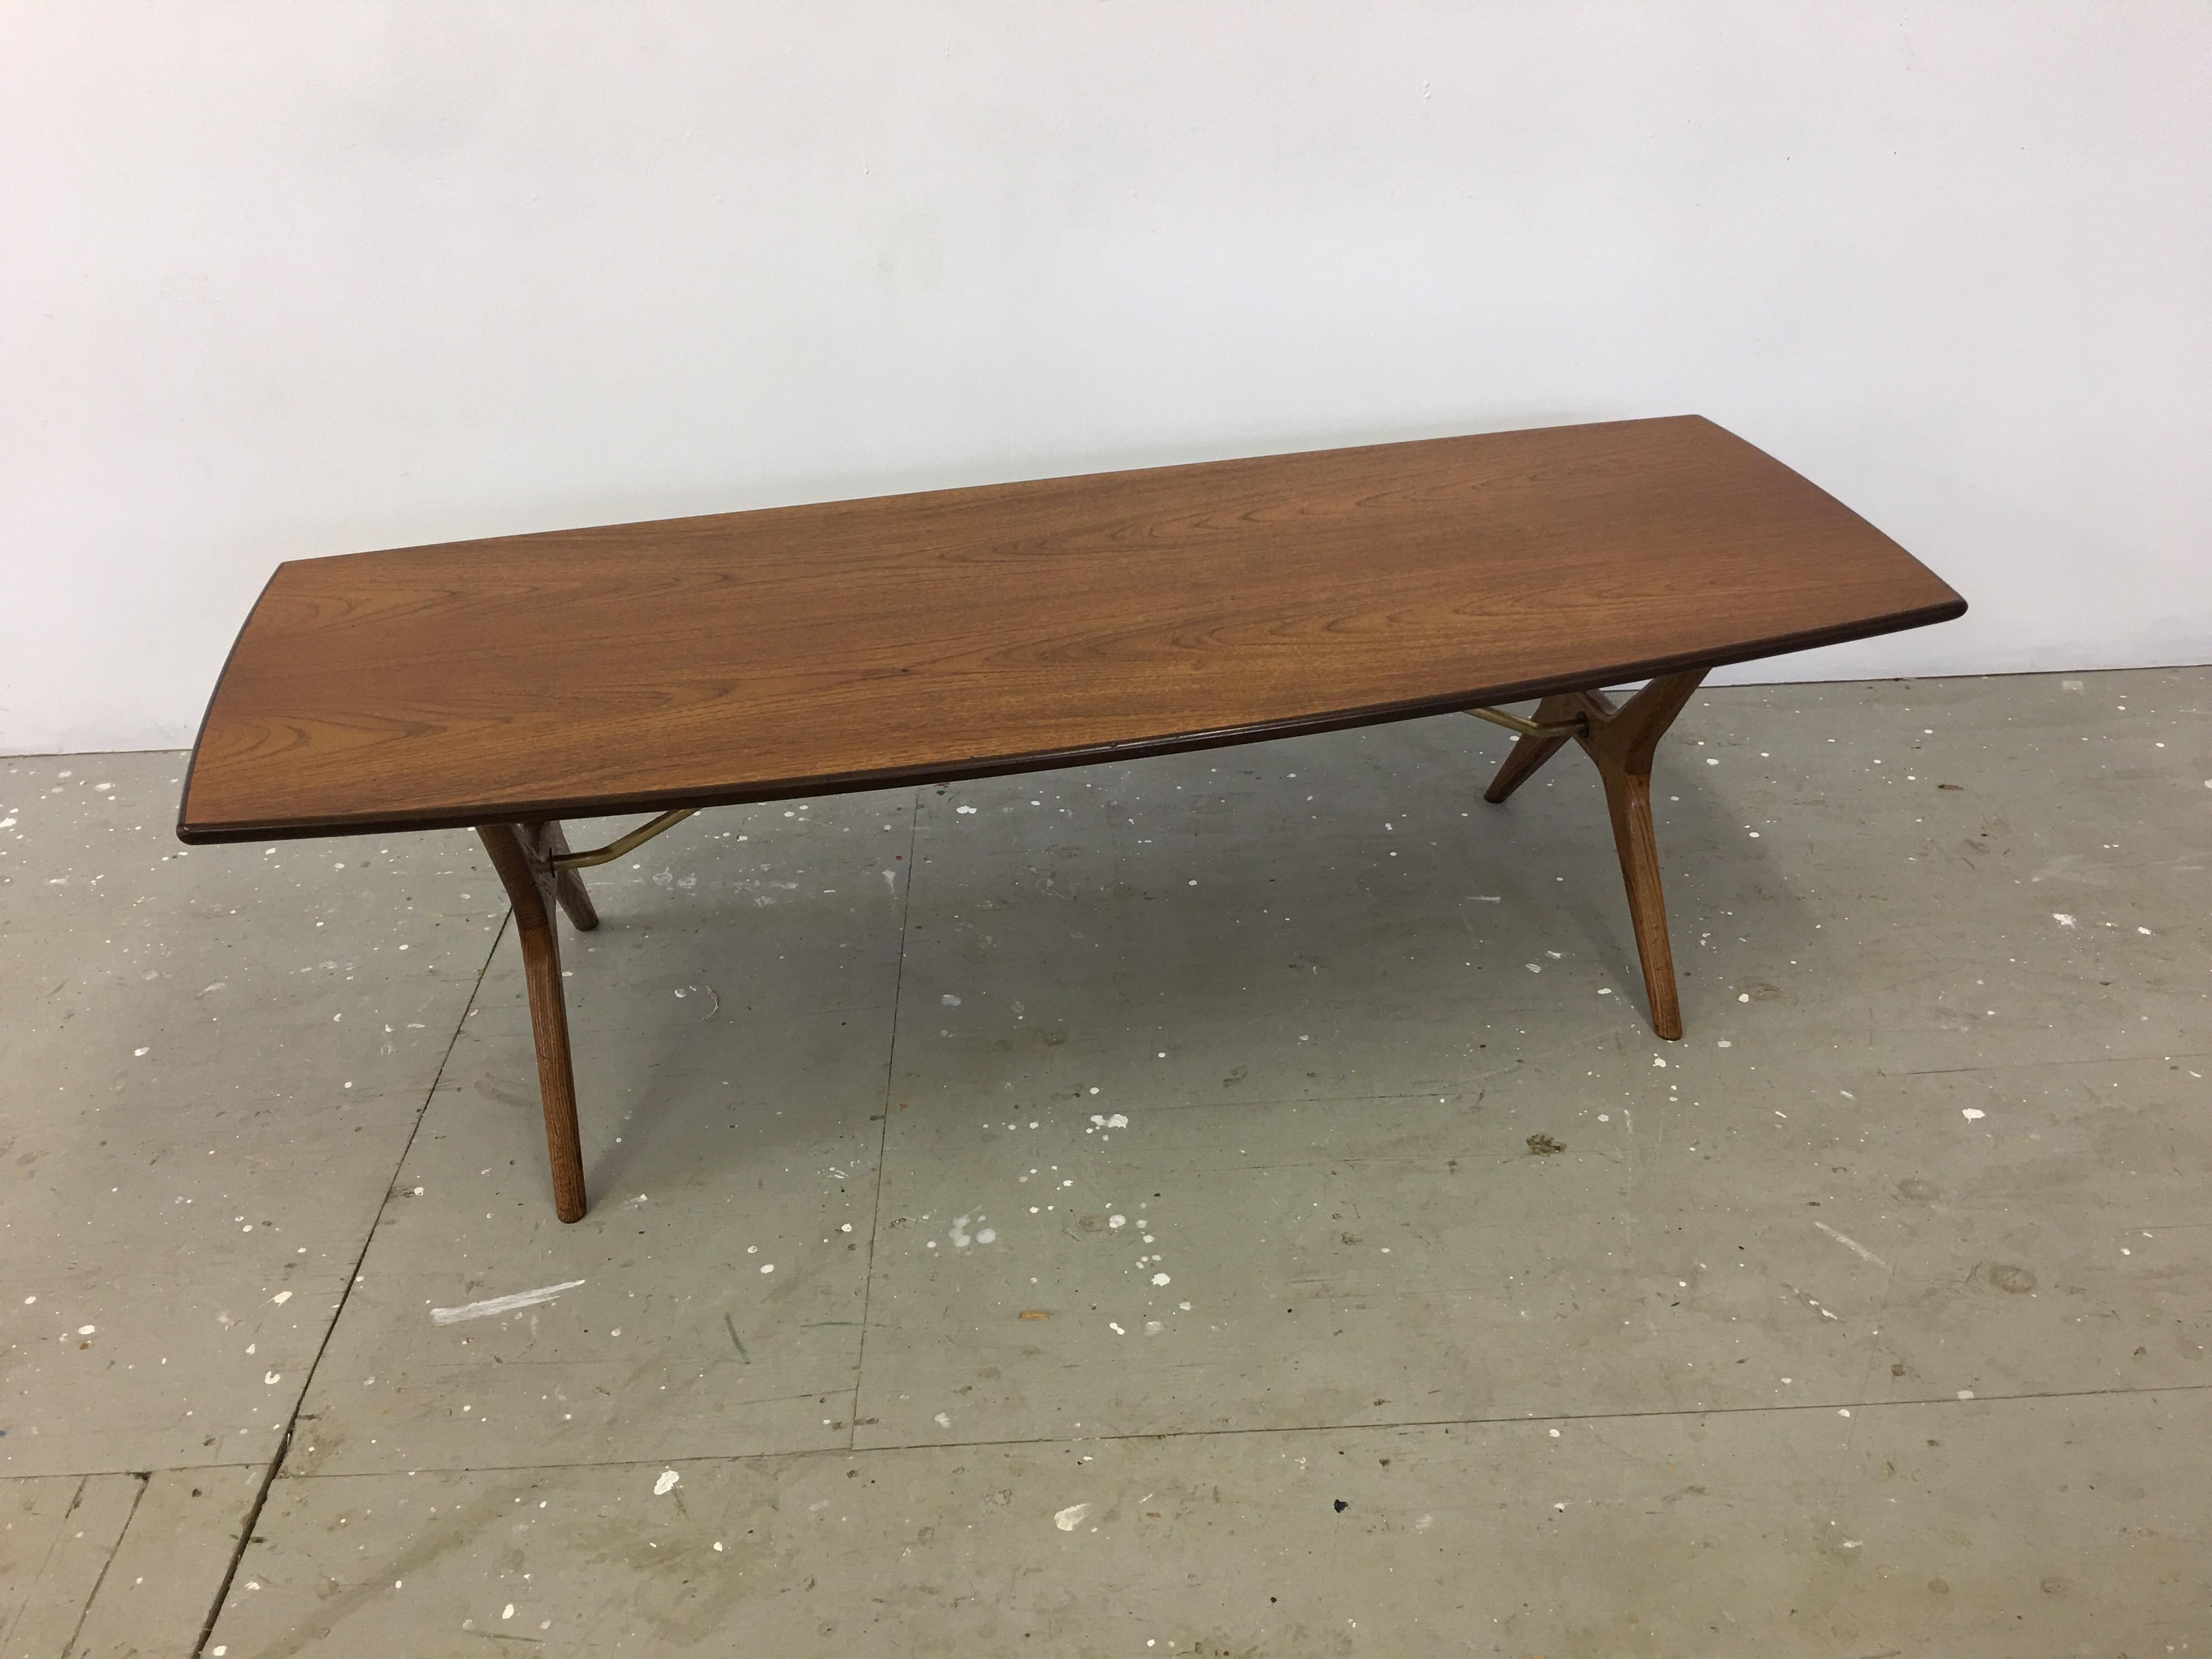 Karl-Erik Ekselius for JOC Vetlanda teak, oak and brass coffee table. Slight boat shaped design top with solid oak X-base legs. Each leg has a brass support that attaches to underside of table and goes through leg with an oversized brass screw.